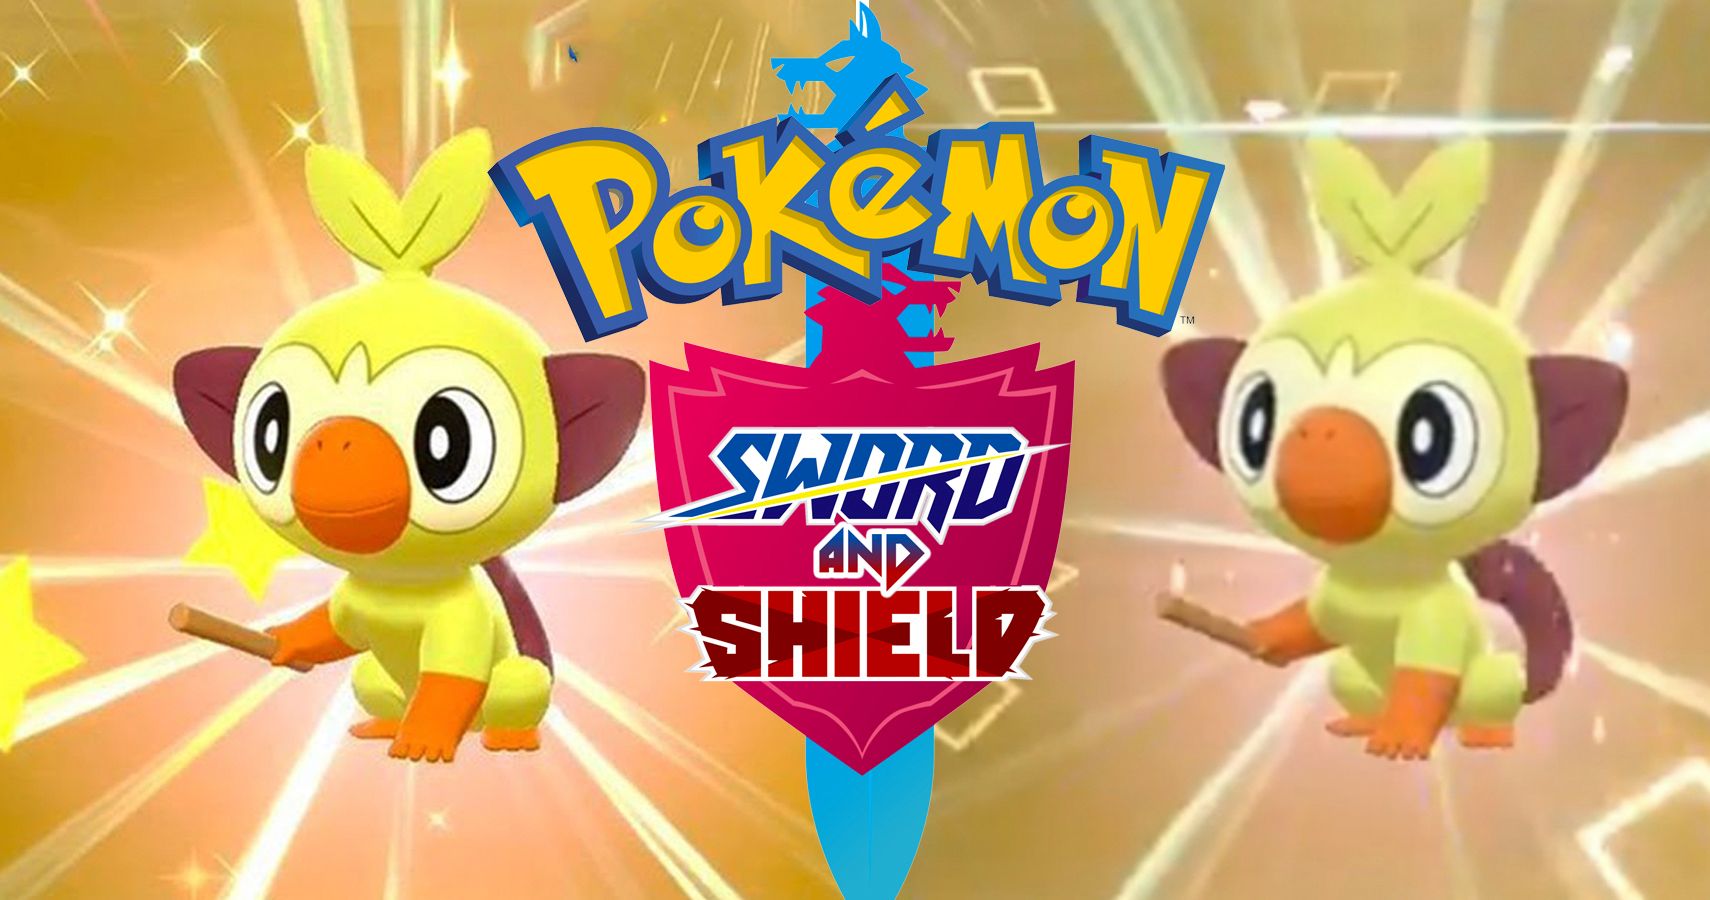 Pokémon Sword & Shield: The Difference Between Star And Square Shiny Pokemon